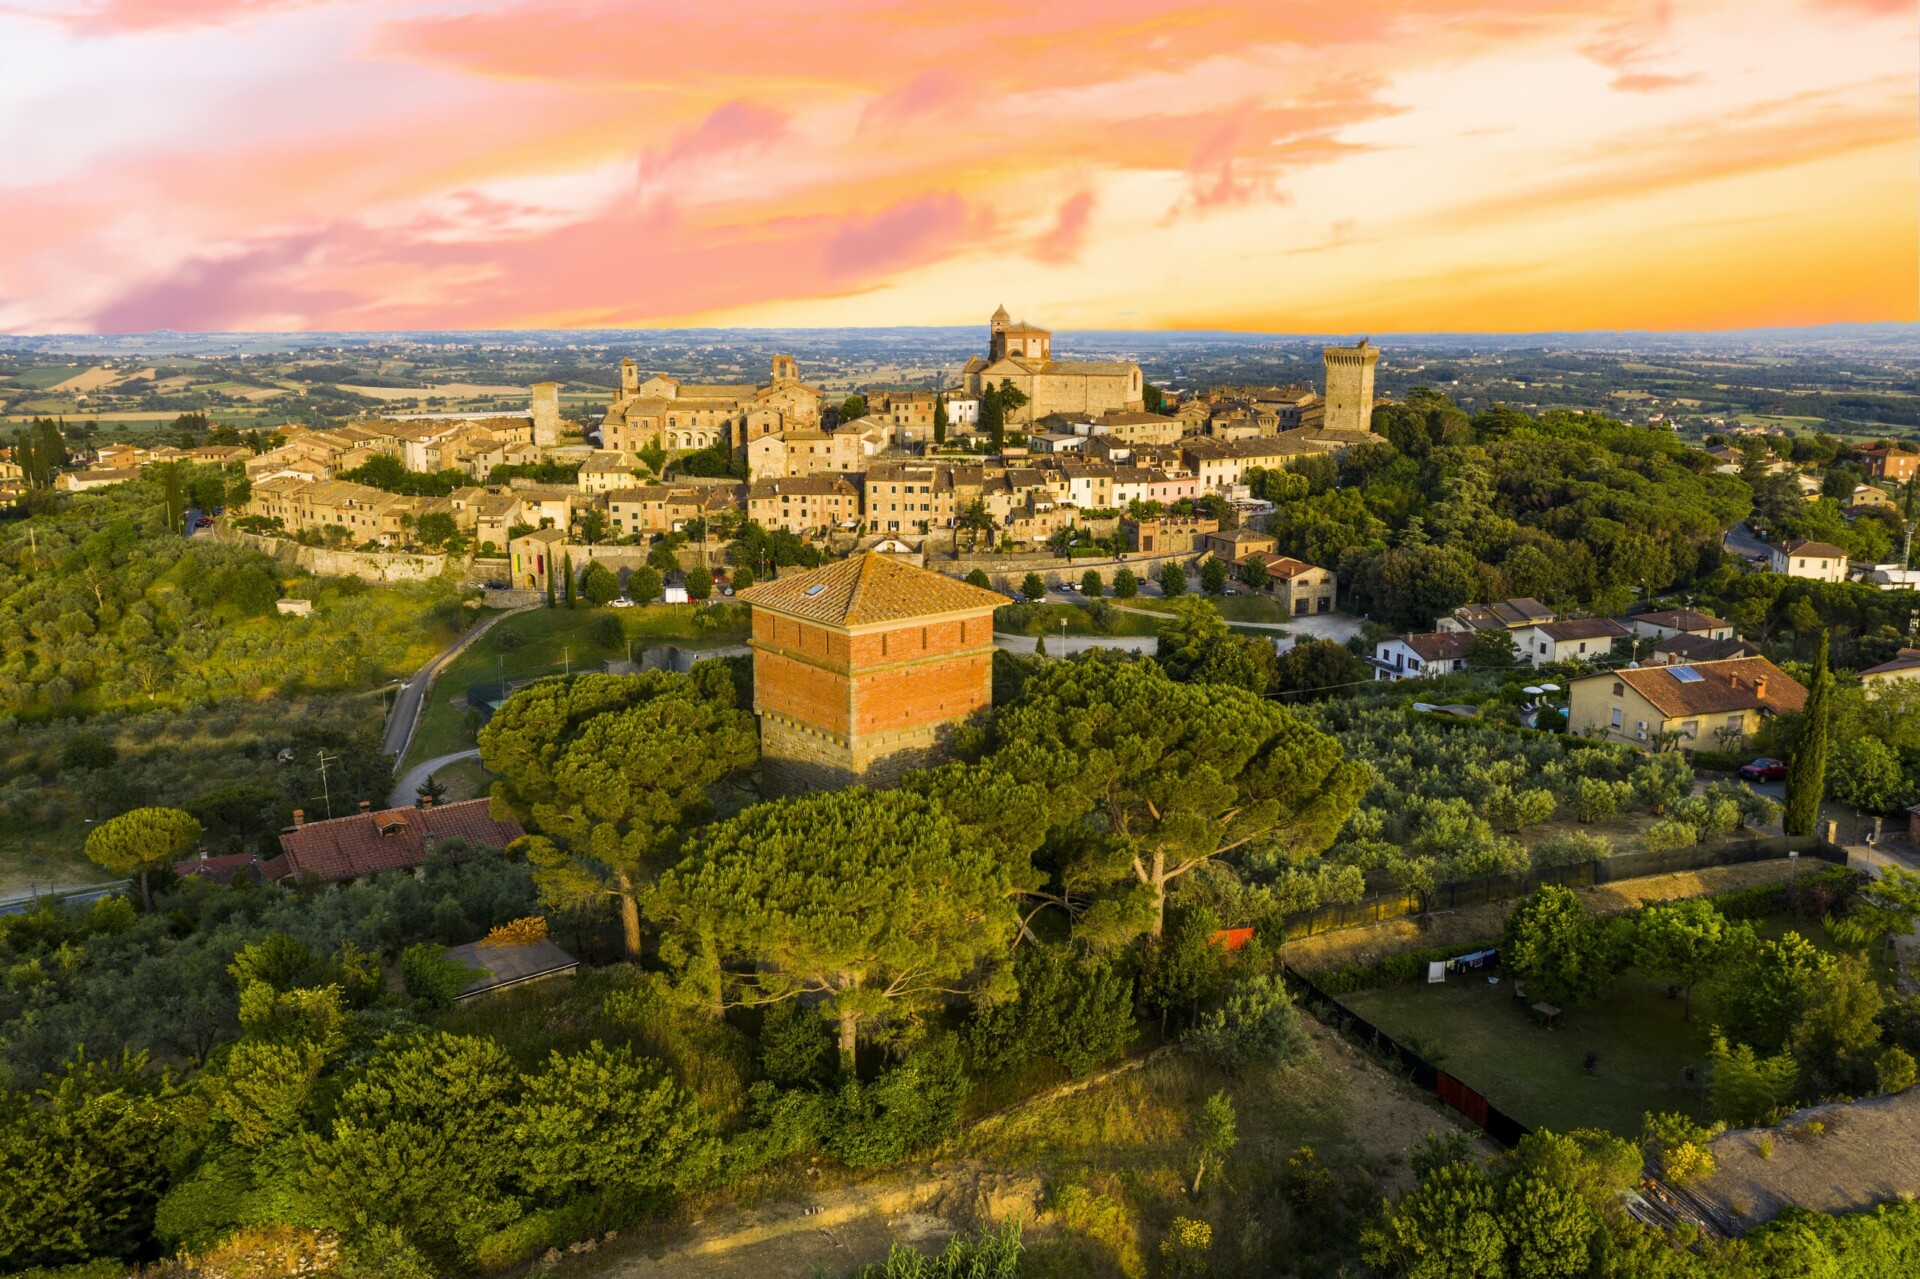 Evening sunset photo of small historic town Lucignano in Tuscany from above along with old Medici fort tower, Italy